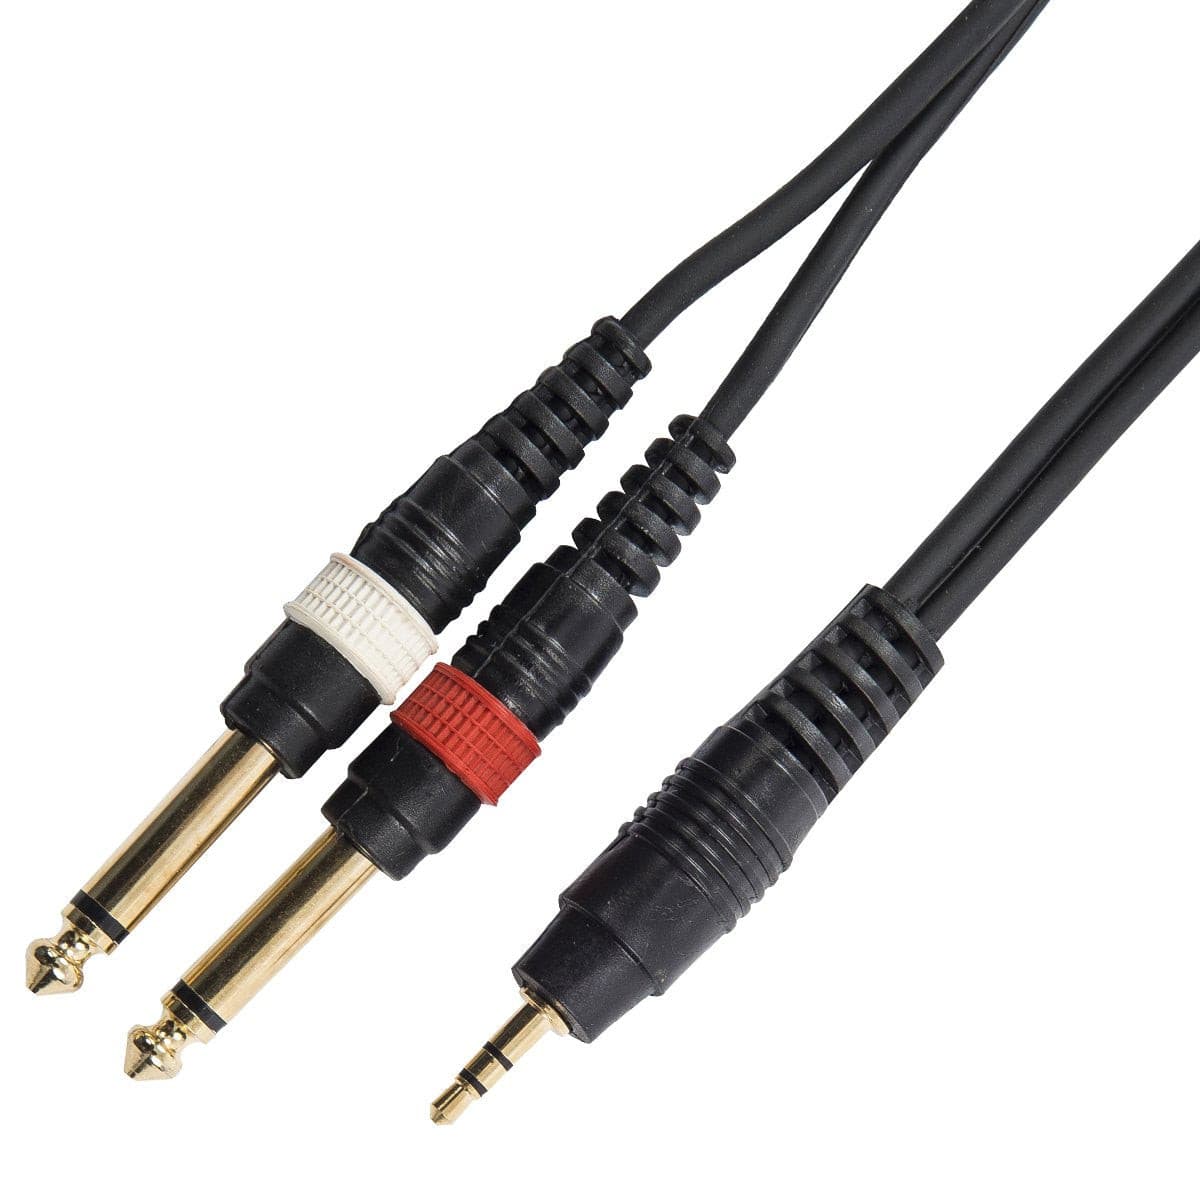 Kinsman Standard Soundcard Cable - 3.5mm Stereo/2 x 6.35mm Mono - 10ft/3m, Cables, Microphones & Headphones for sale at Richards Guitars.